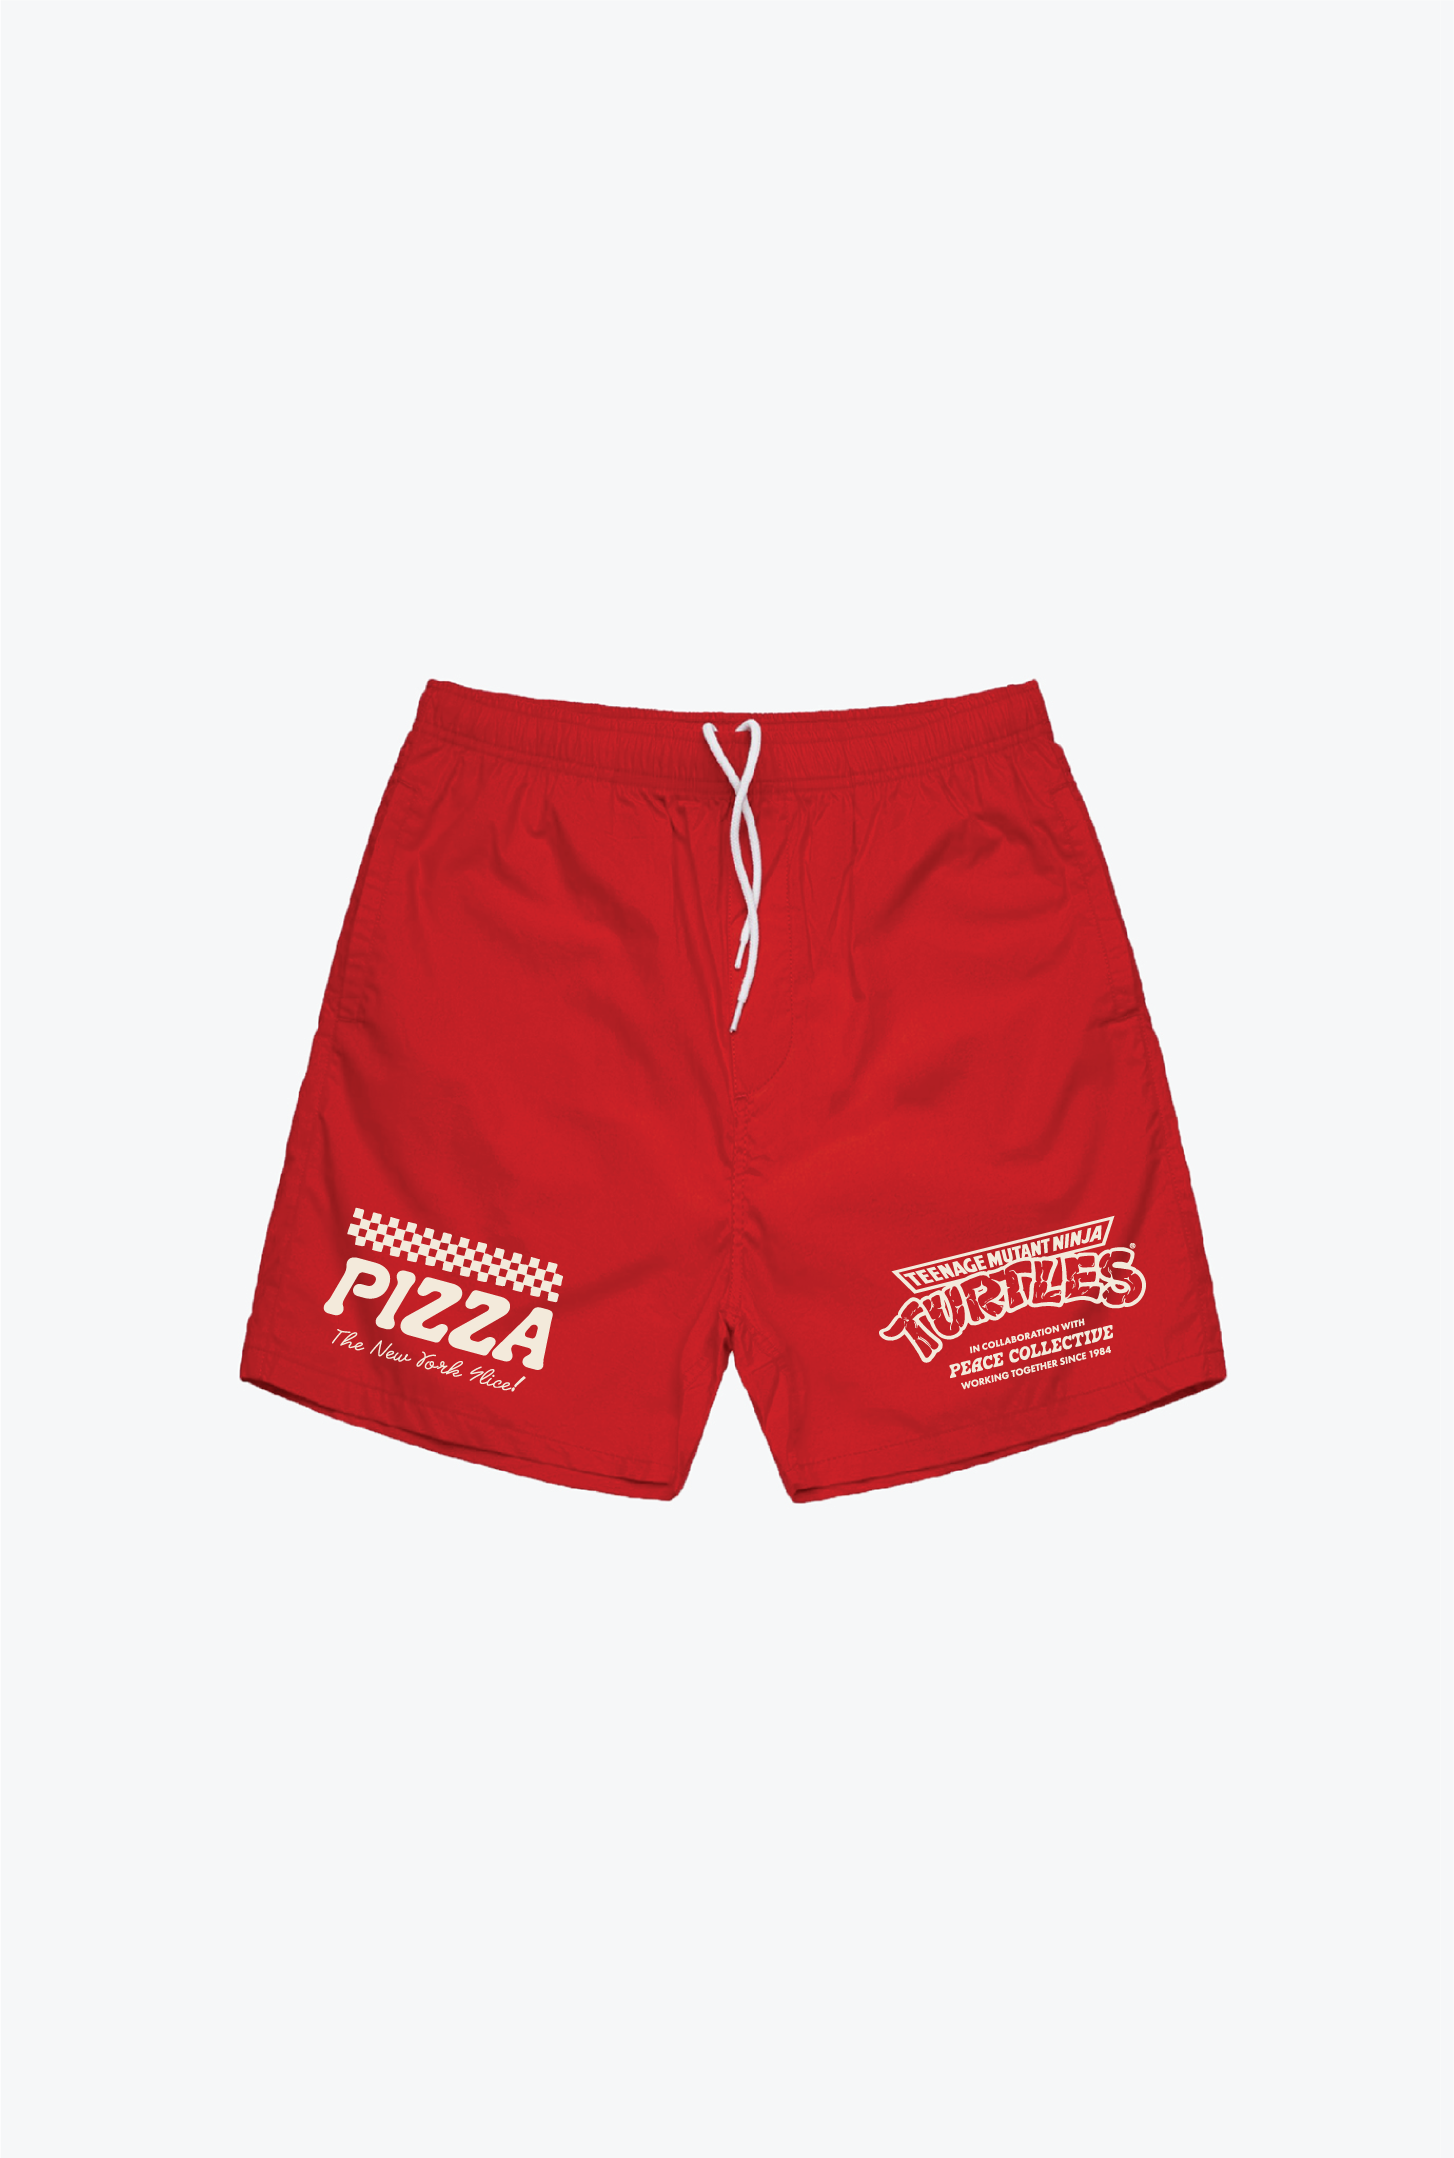 P/C x TMNT Pizza Shop Board Shorts - Red